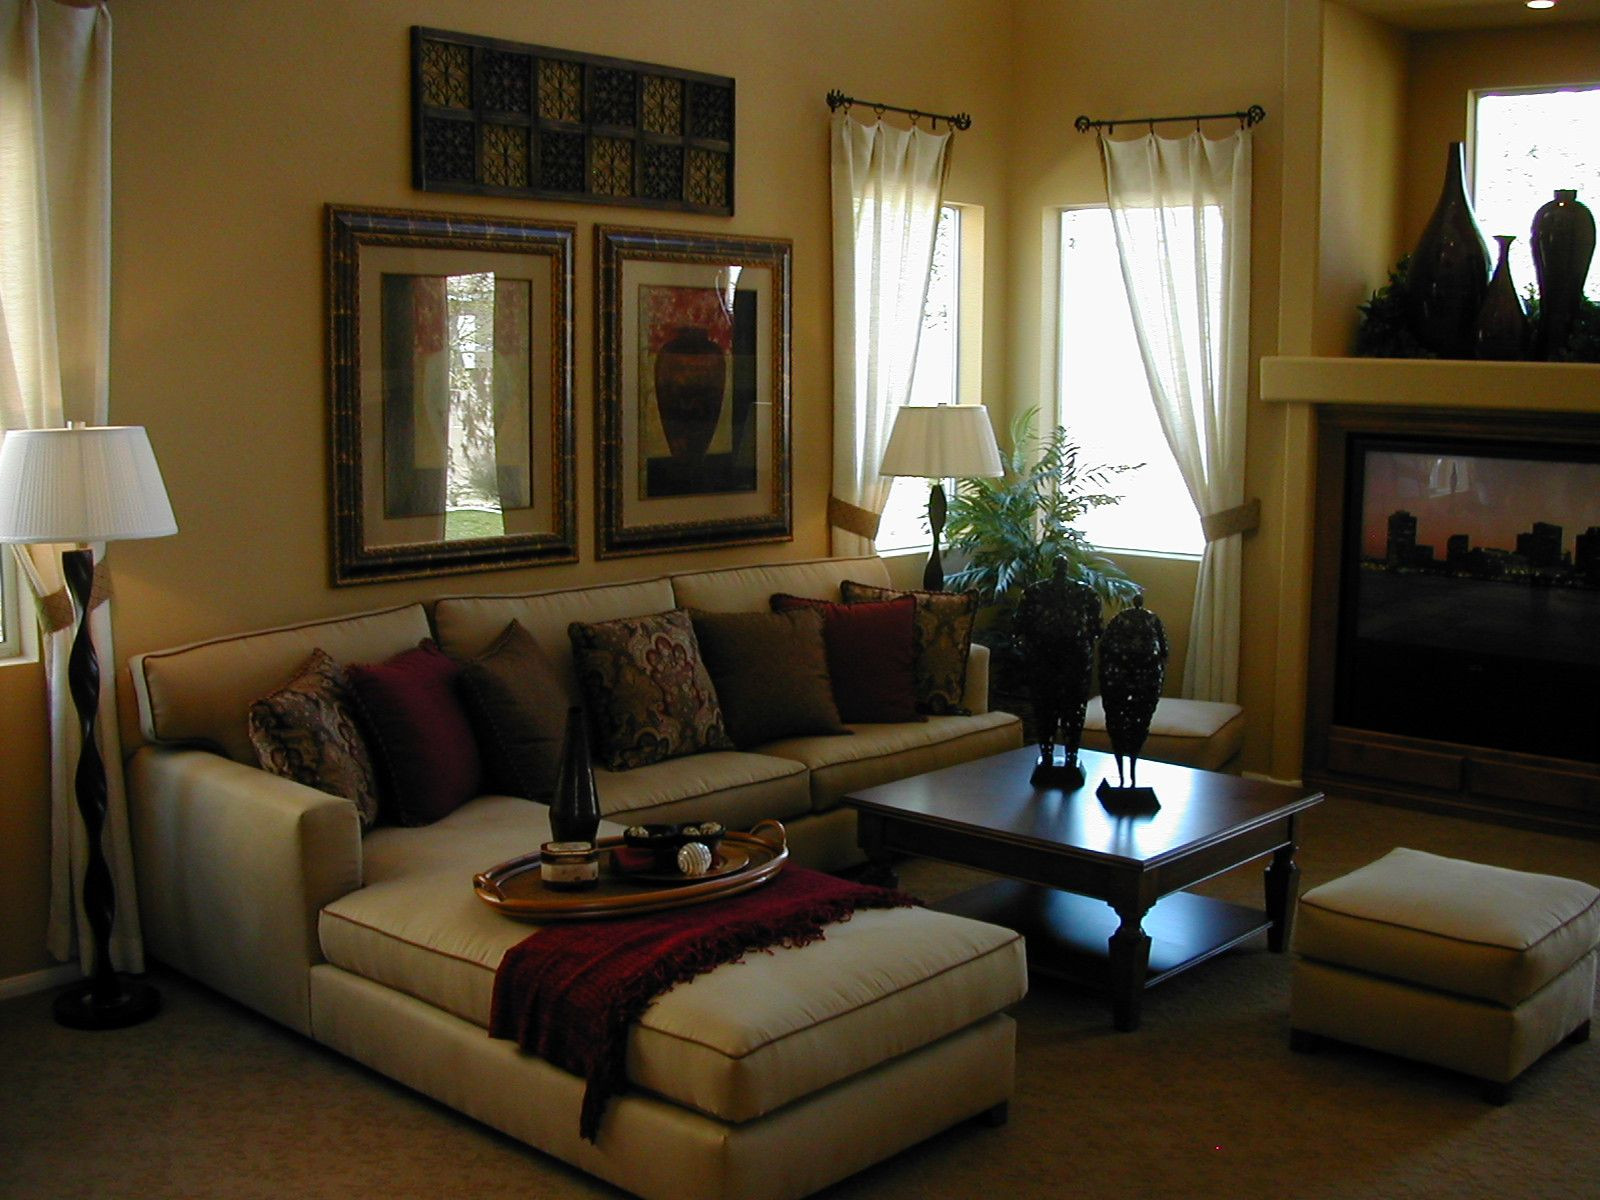 Living Room Ideas Images
 Living Room Furniture Layout Ideas for Different Room